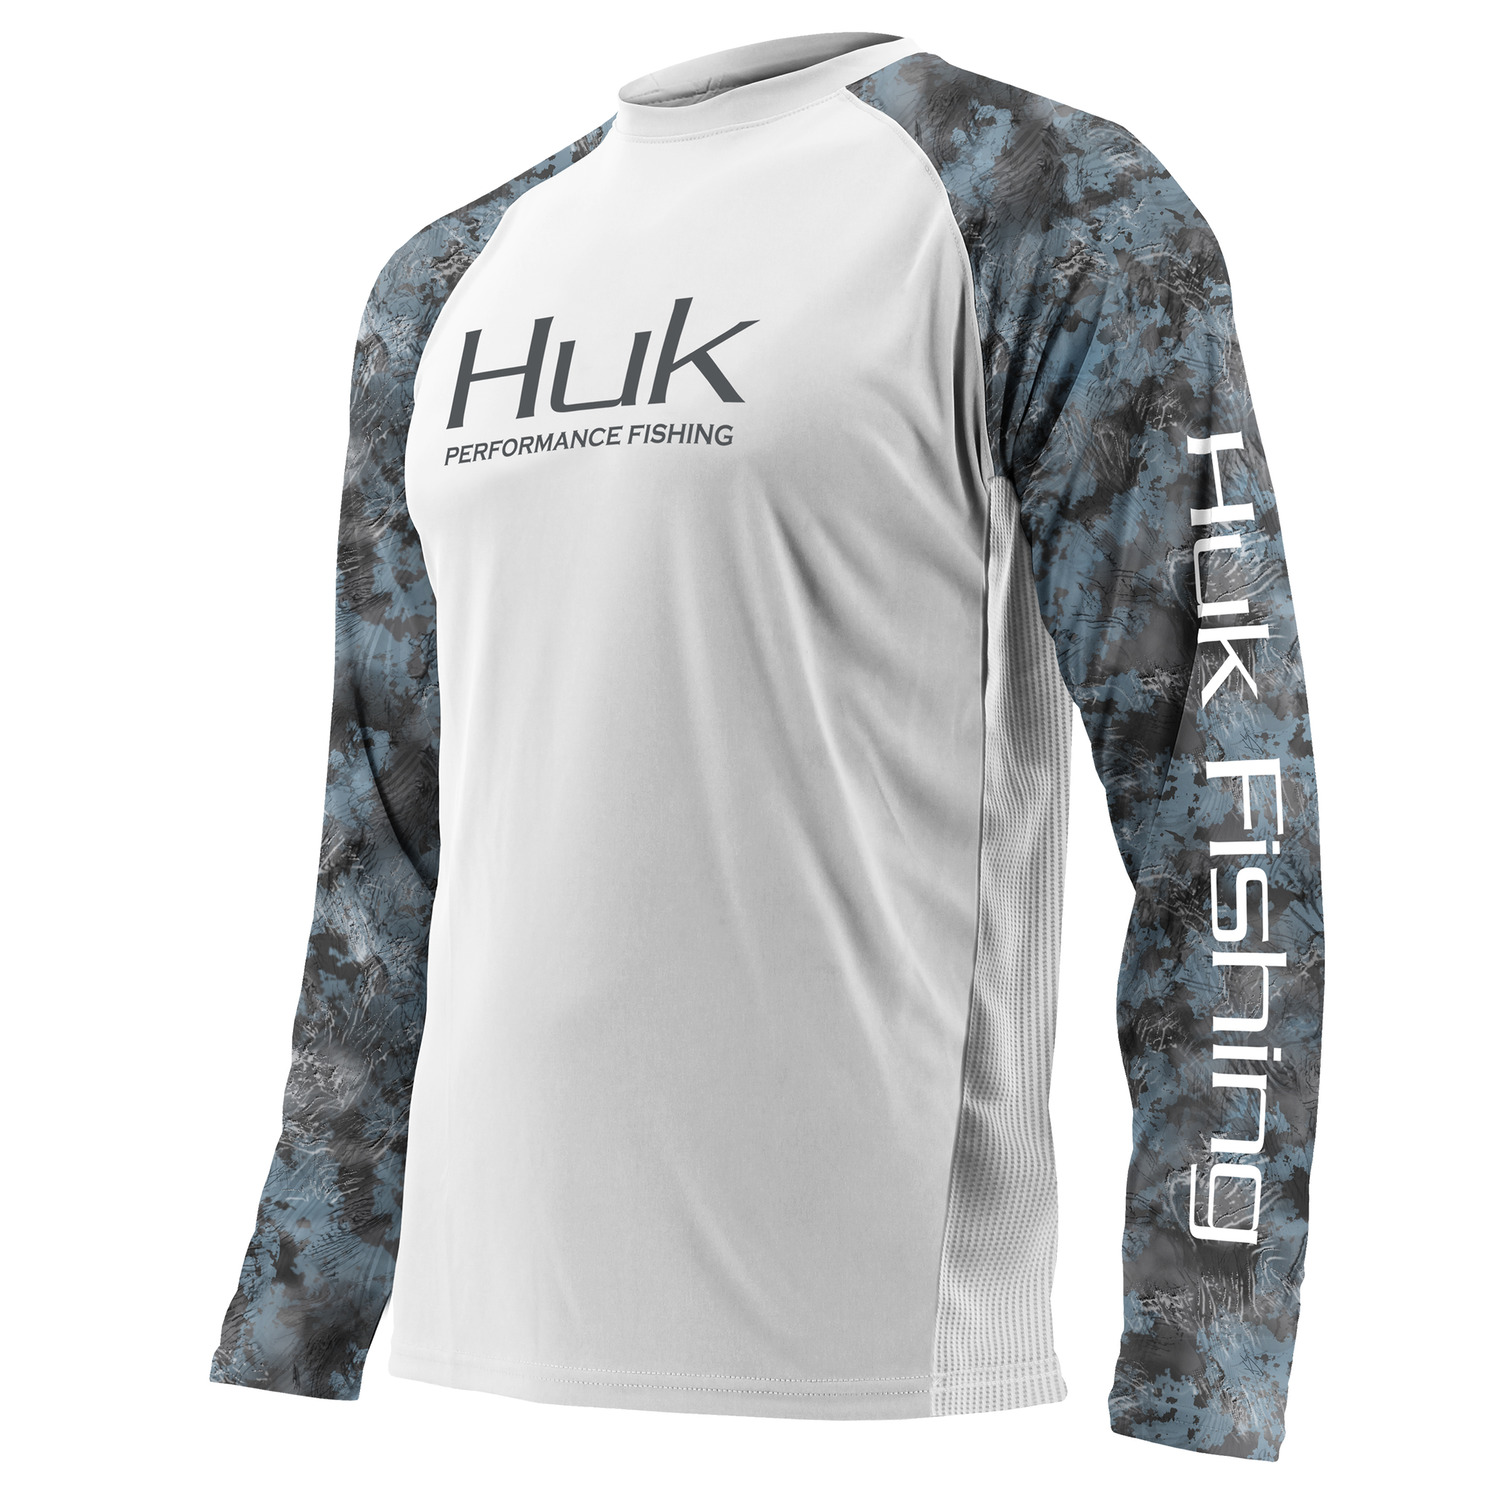 Huk on board as official clothing sponsor of WON